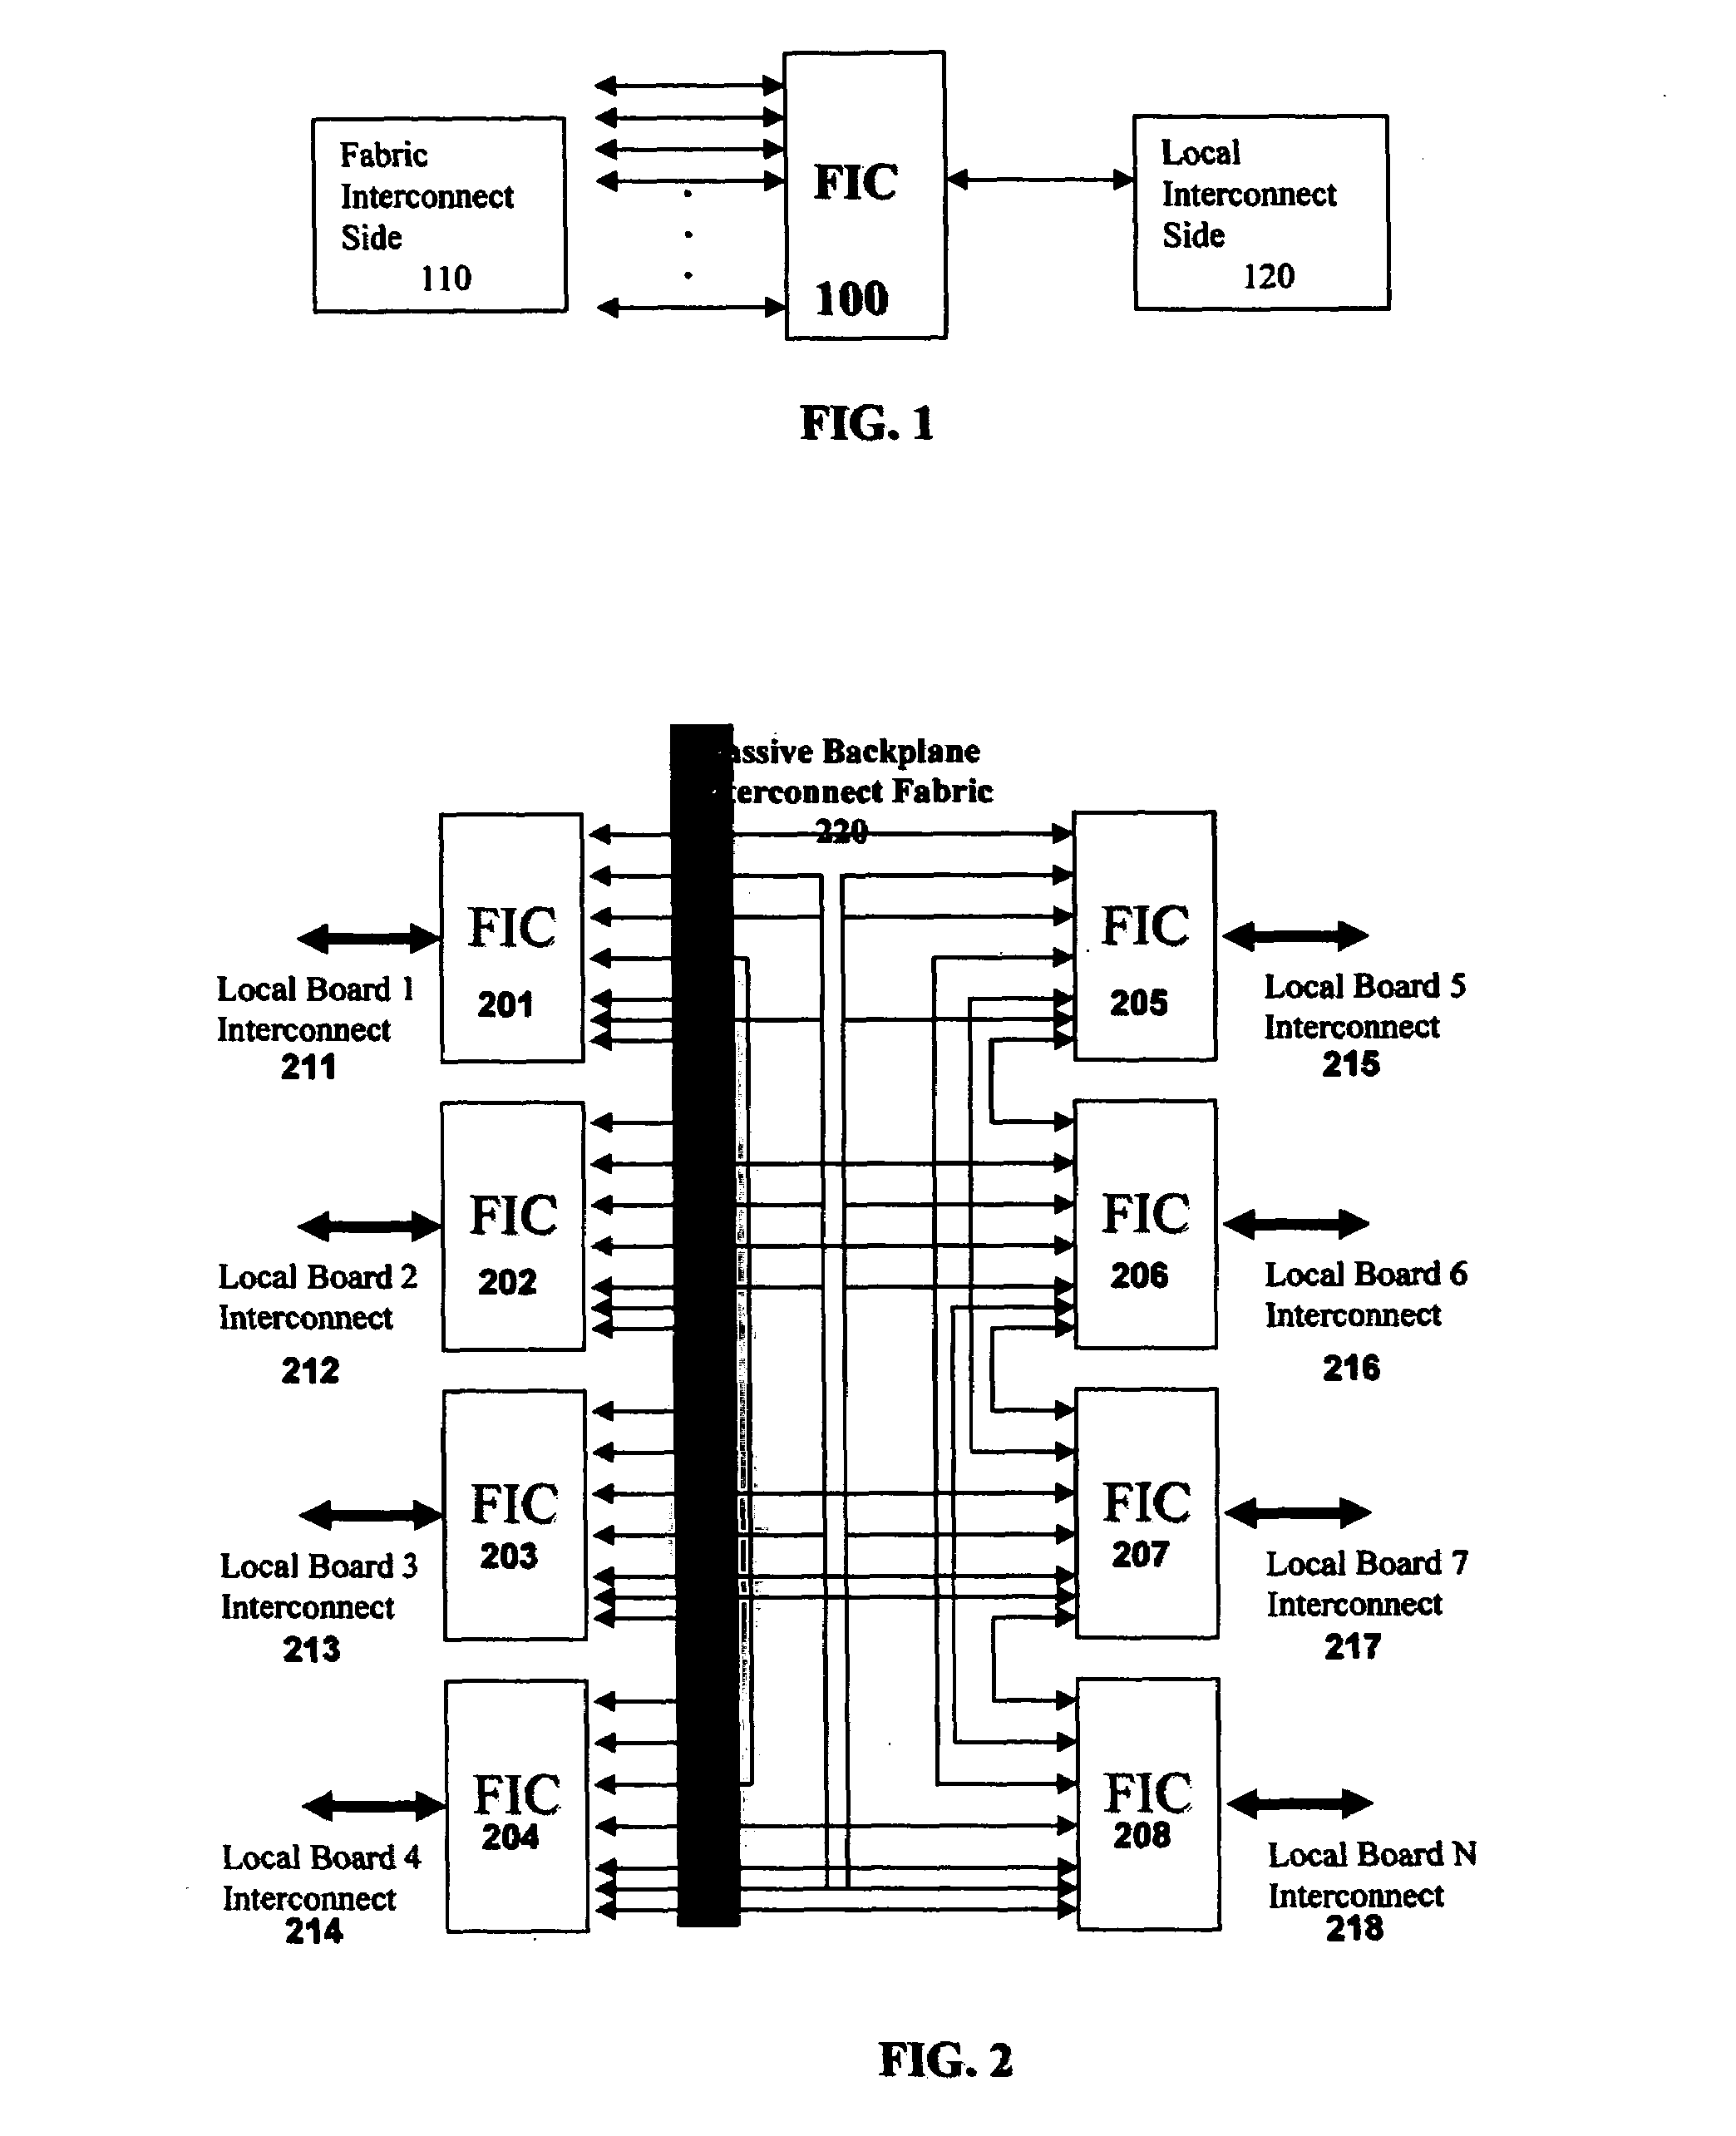 Multi-port high-speed serial fabric interconnect chip in a meshed configuration